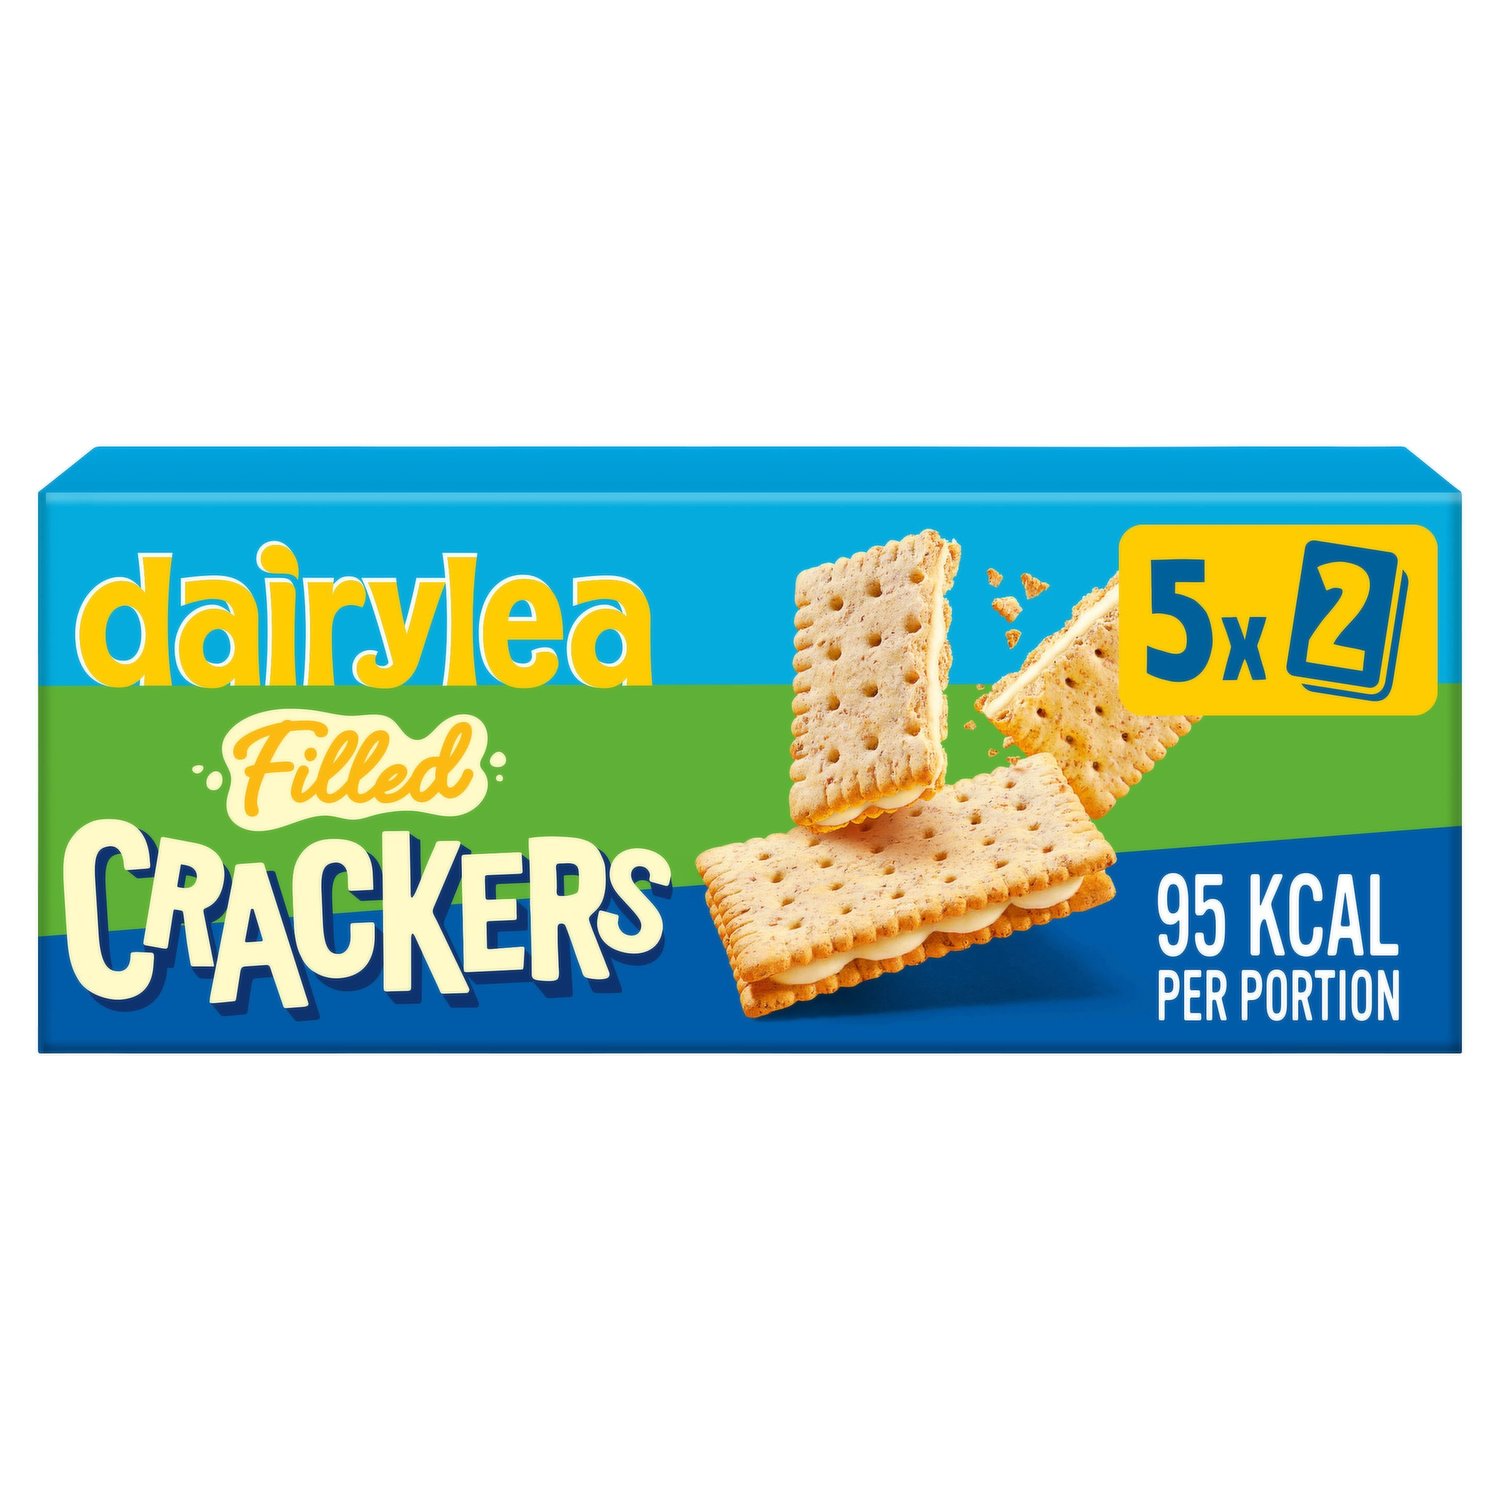 CRACKERS COLUSSI SALTED 500 GR SERVINGS SALAD SNACK CRACKERS WITH SALTY